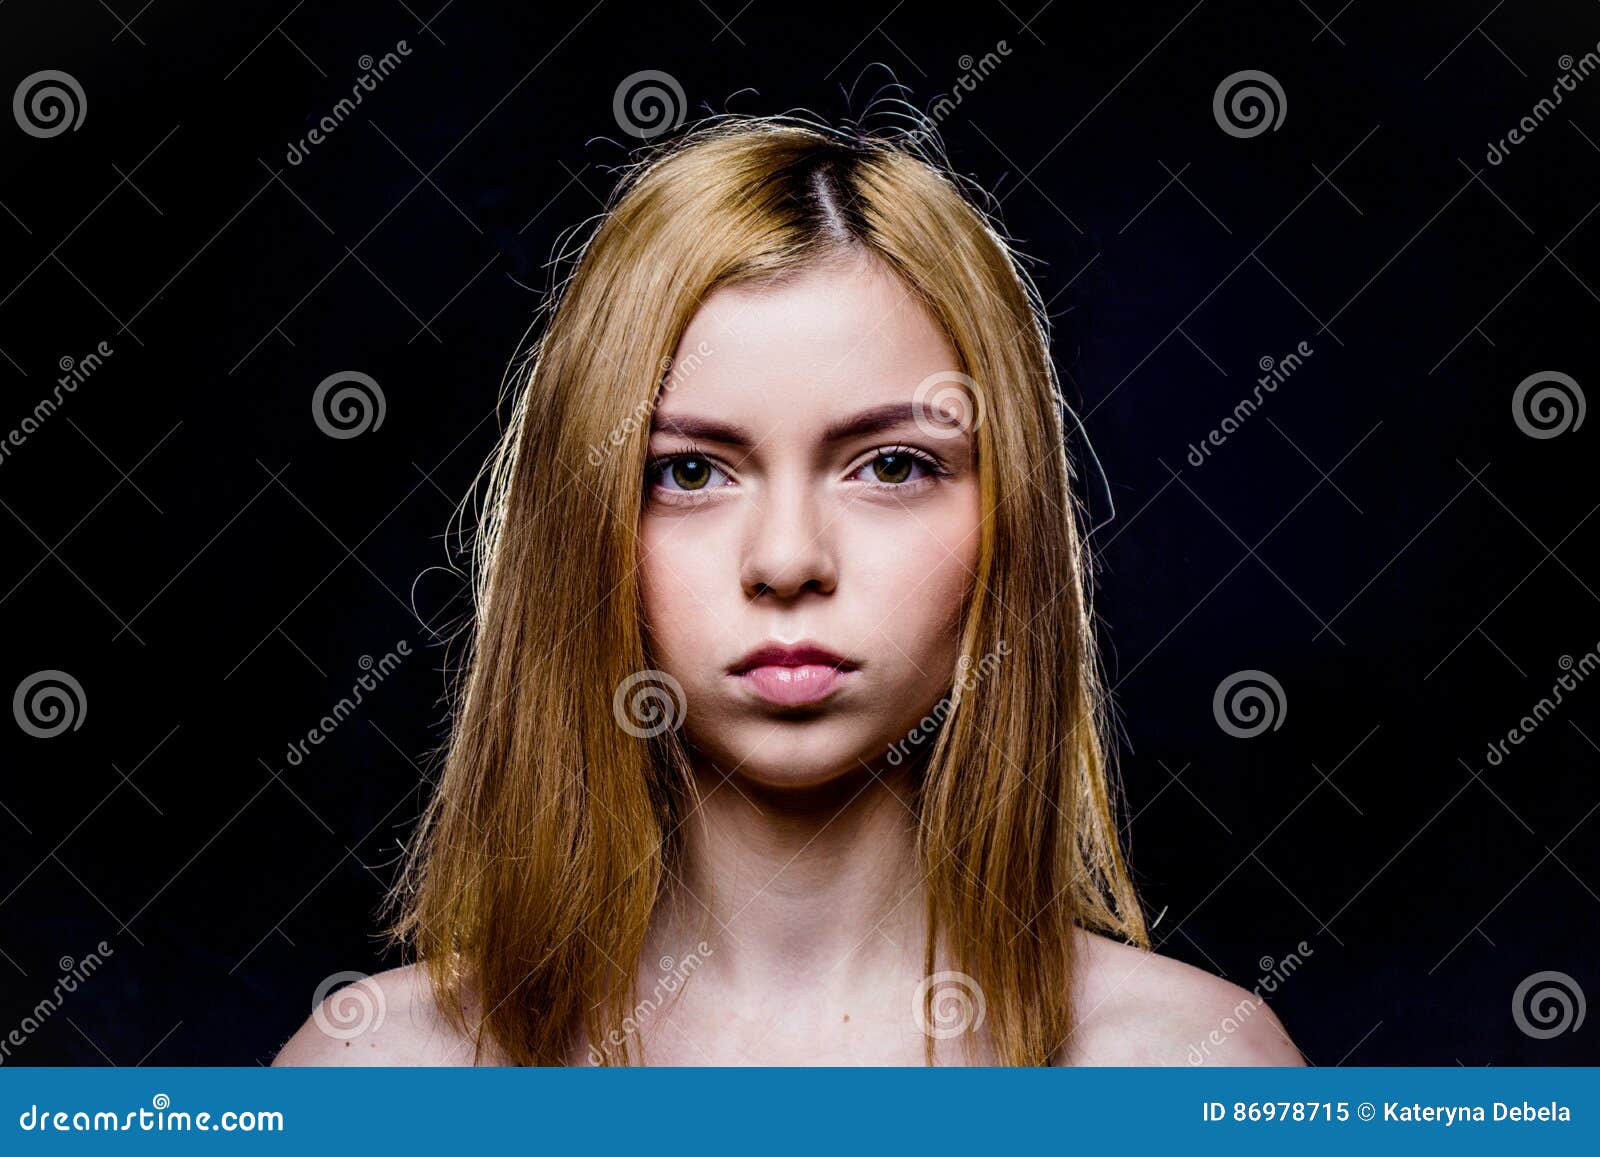 Sad Girl With Brown Eyes. The Blonde With Short Hair. She Looks Straight  Into The Camera. Gentle Make-Up Stock Image - Image Of Features, Blonde:  86978715